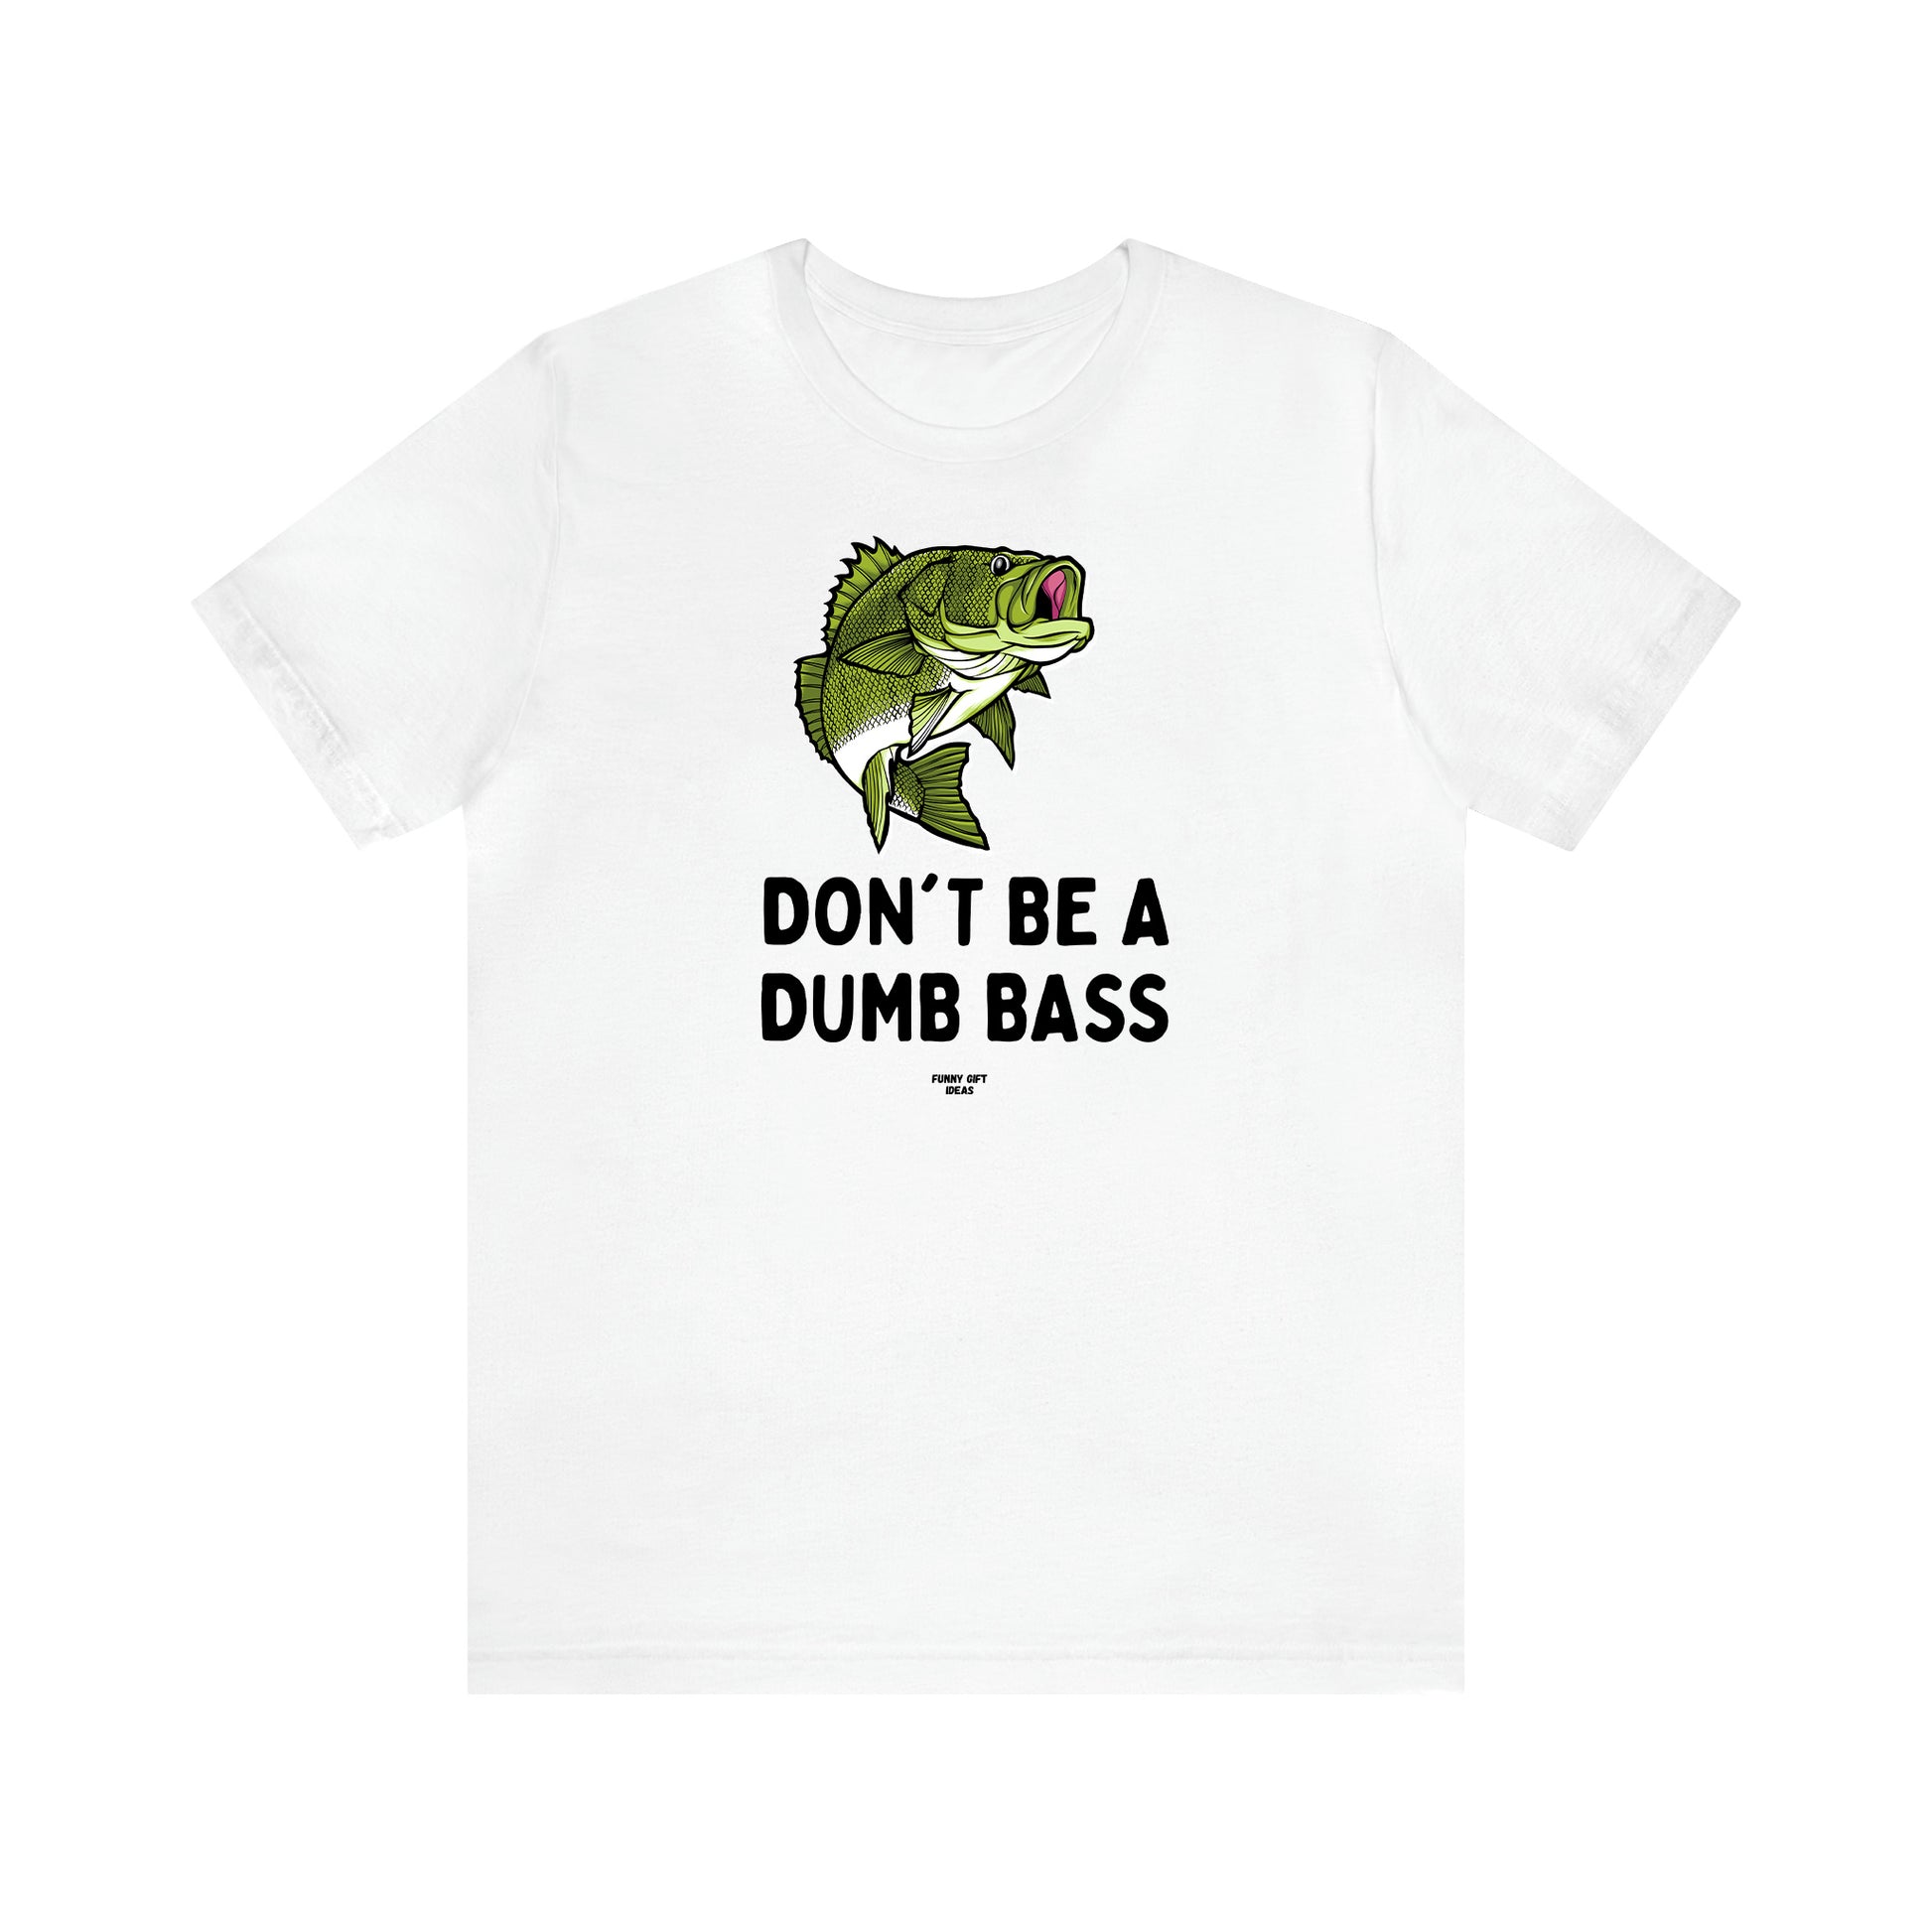 Men's T Shirts Don't Be a Dumb Bass - Funny Gift Ideas